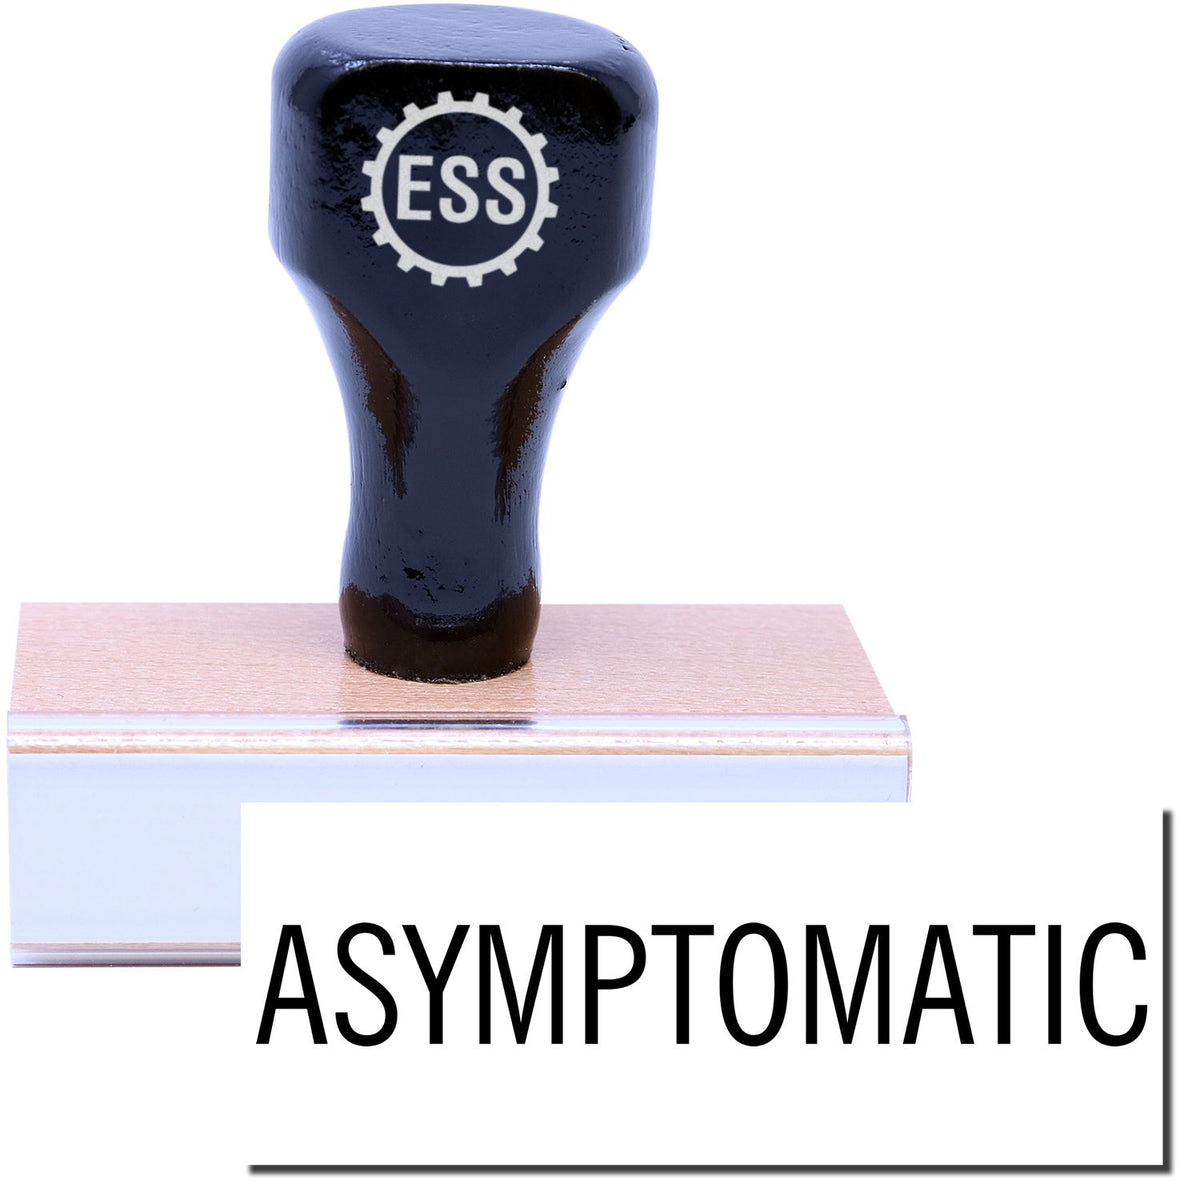 A stock office rubber stamp with a stamped image showing how the text &quot;ASYMPTOMATIC&quot; is displayed after stamping.